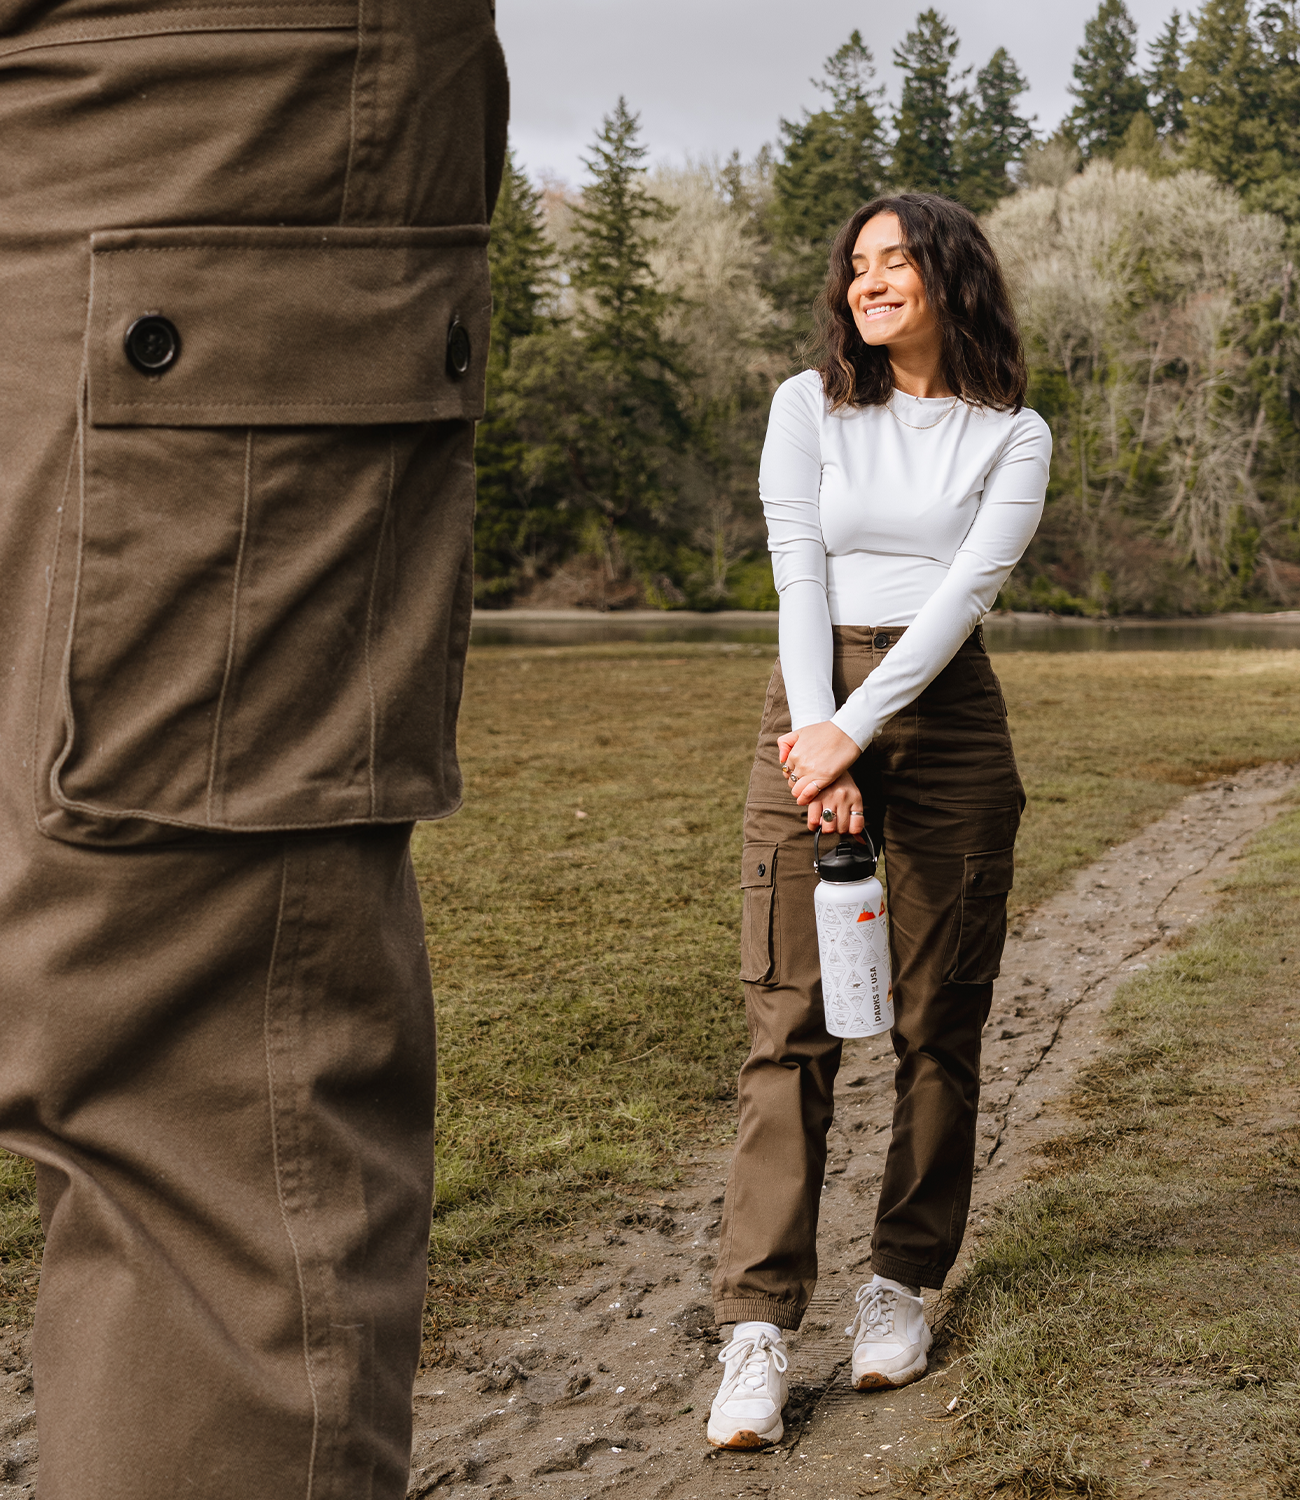 Brown cargo pant pocket on left and woman hiking in brown cargo pants and white travel water bottle